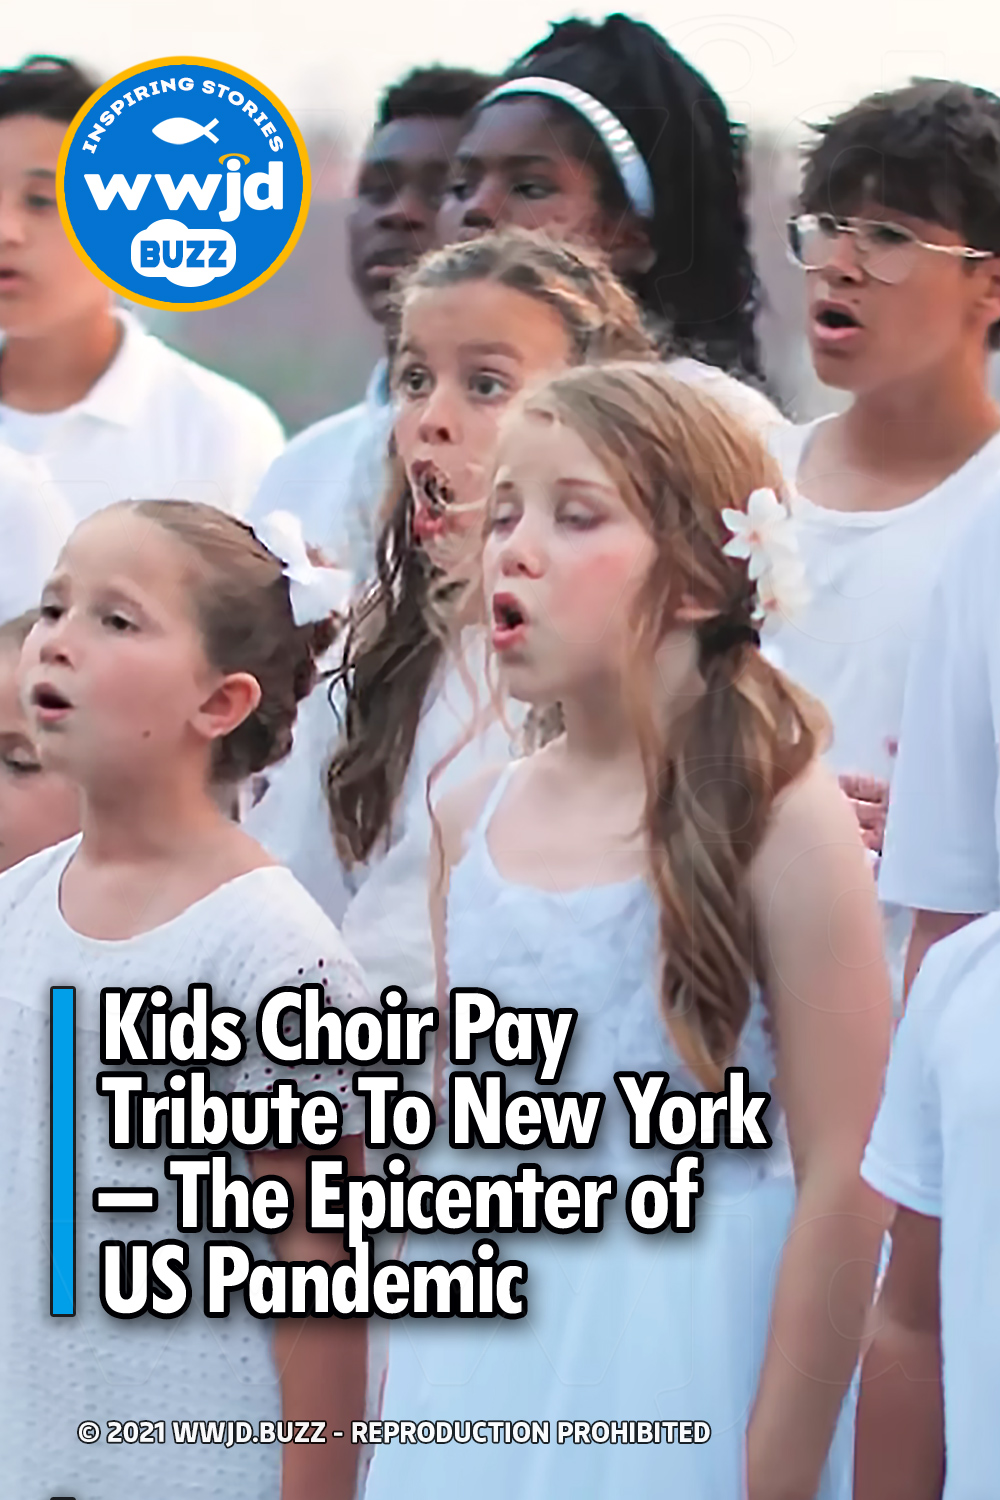 Kids Choir Pay Tribute To New York - The Epicenter of US Pandemic